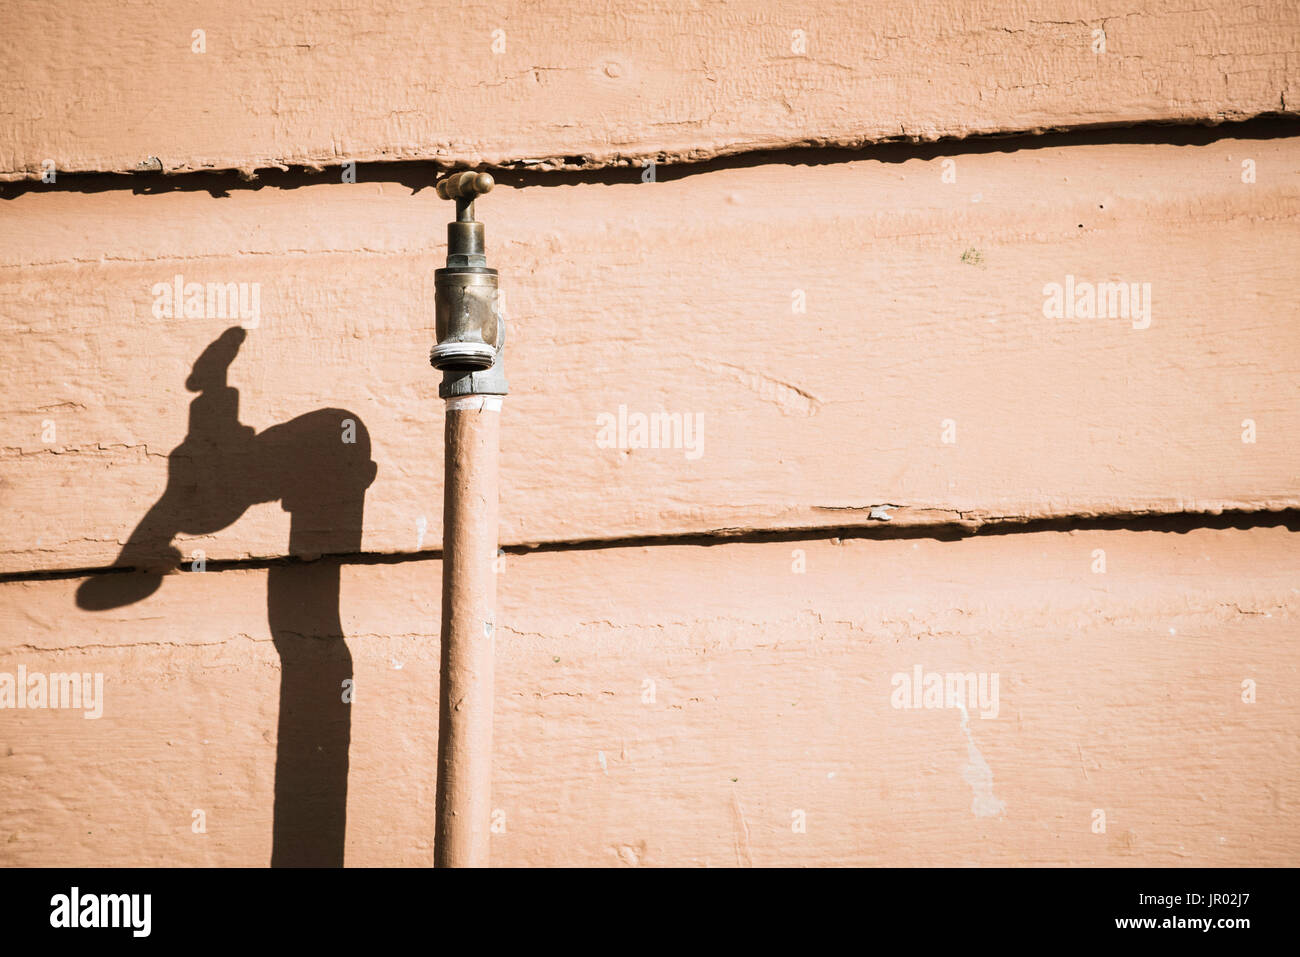 A Single Spigot Or Tap Or Faucet Up Against A Timber Wall In